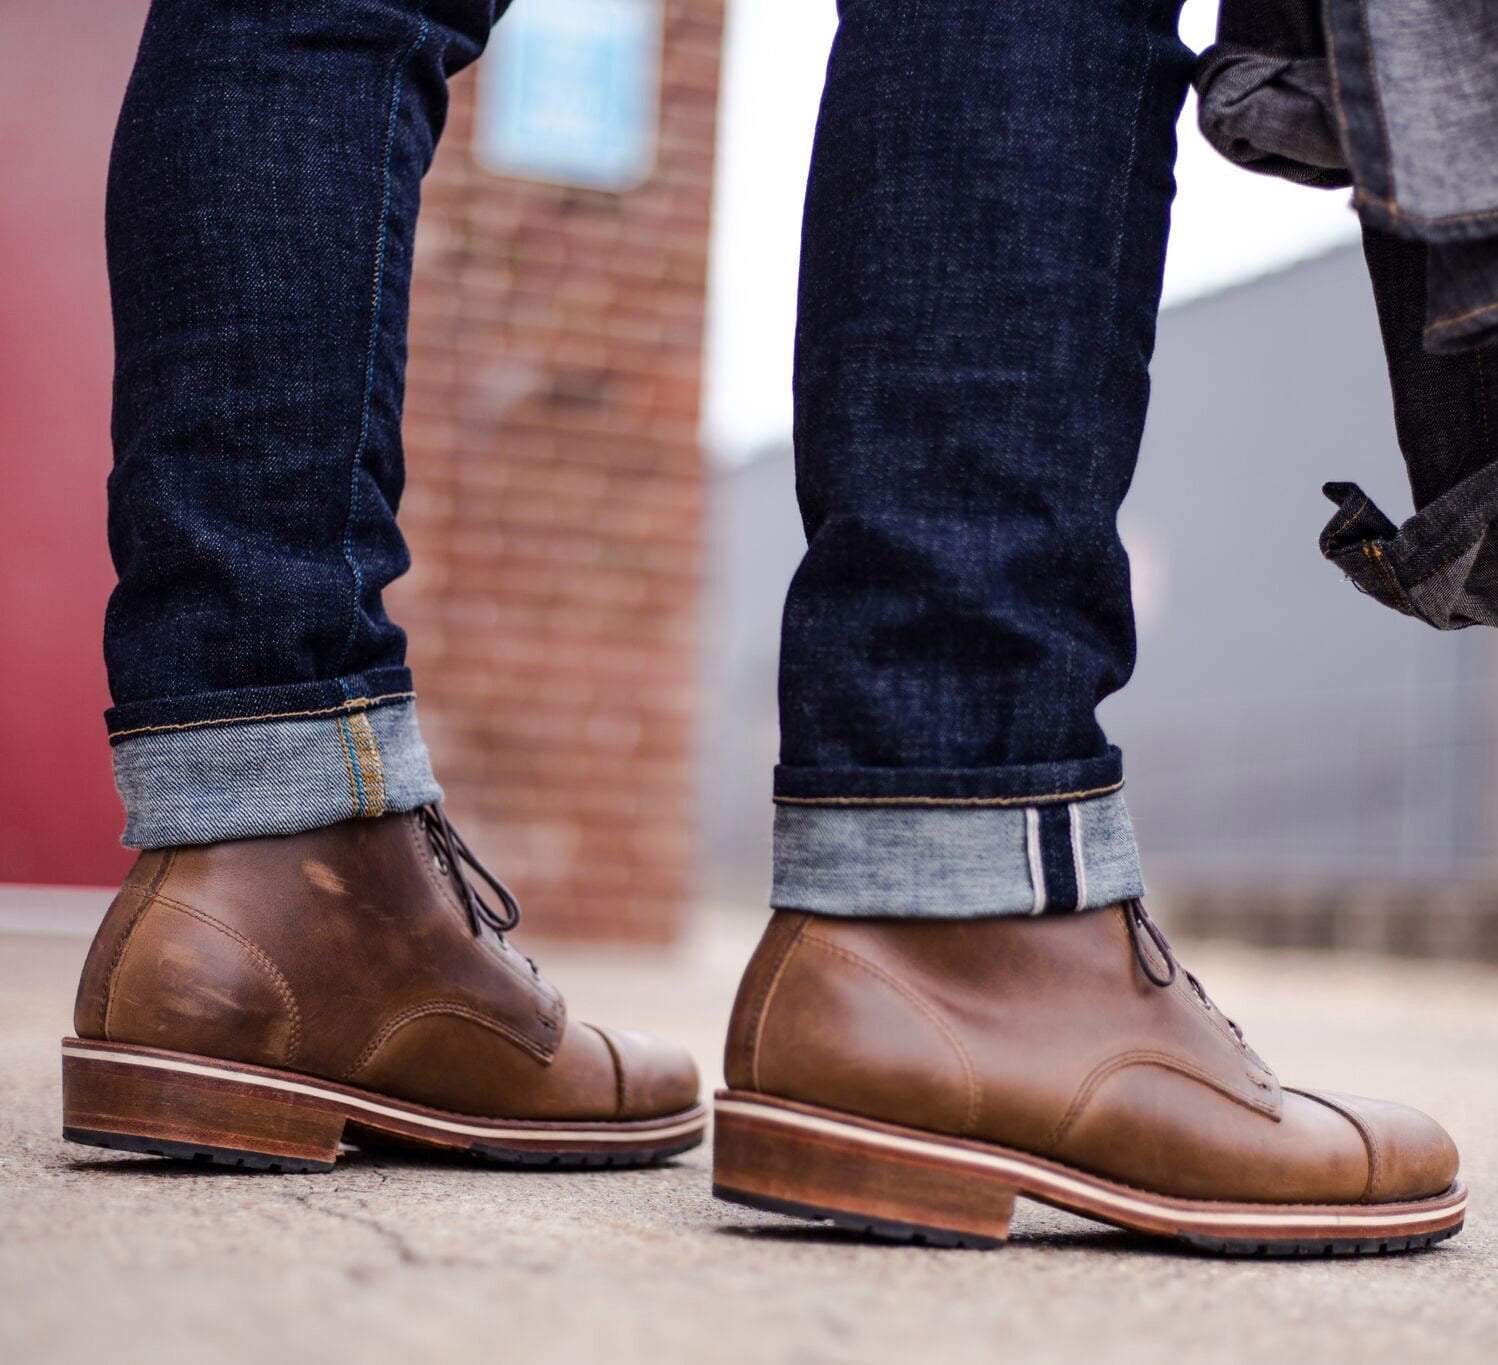 Mens Casual Boots to Wear with Jeans by Nate Pruitt